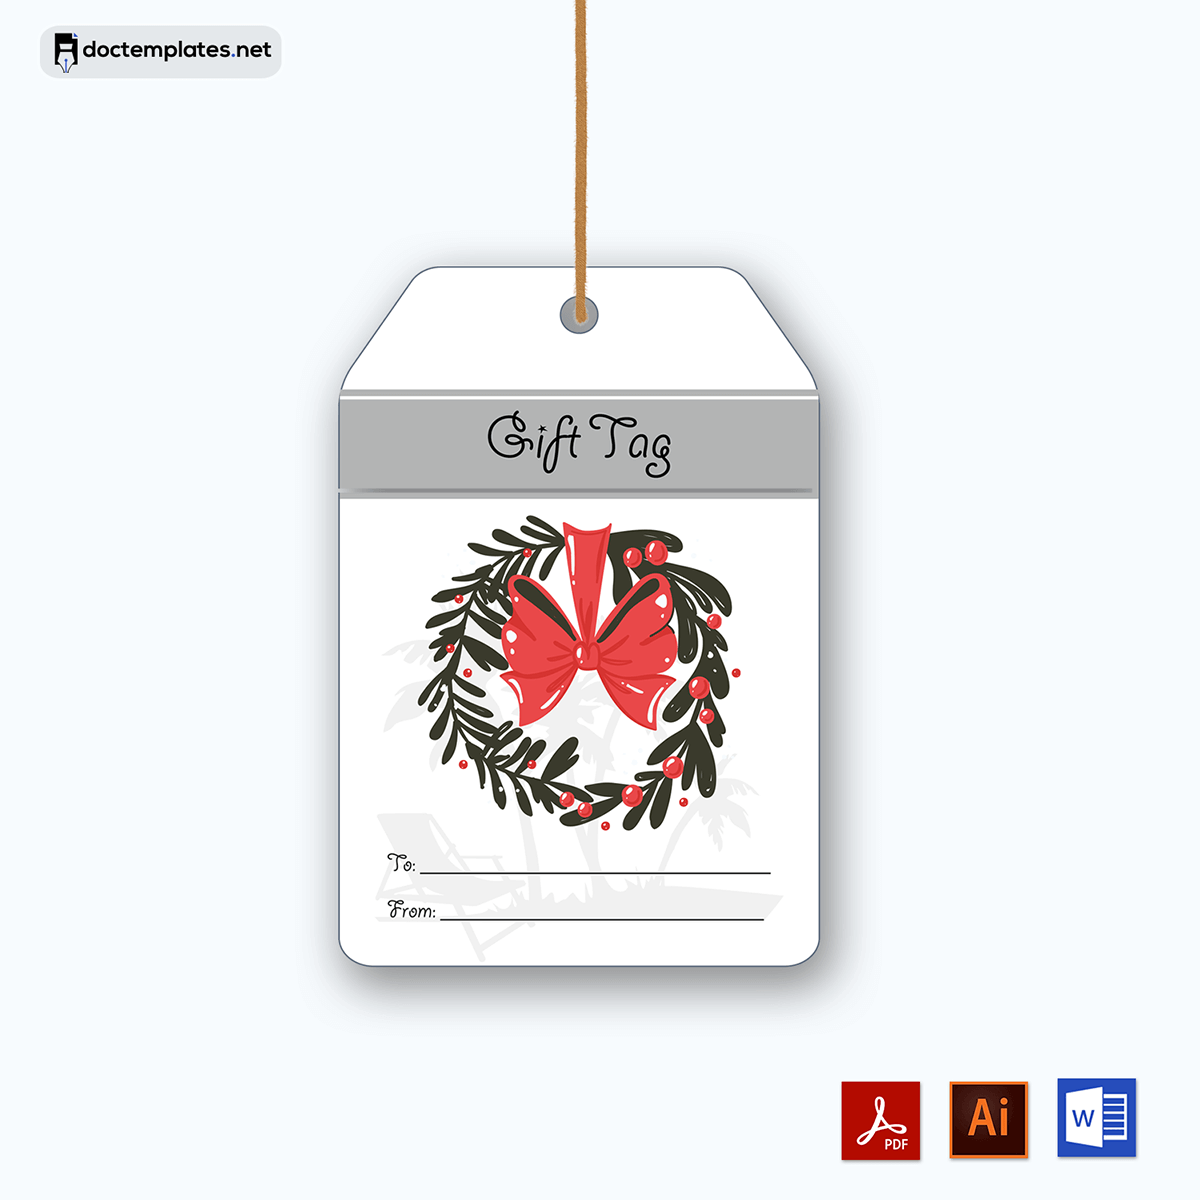 Gift Tags that Impress - Exclusive Adobe Illustrator Templates